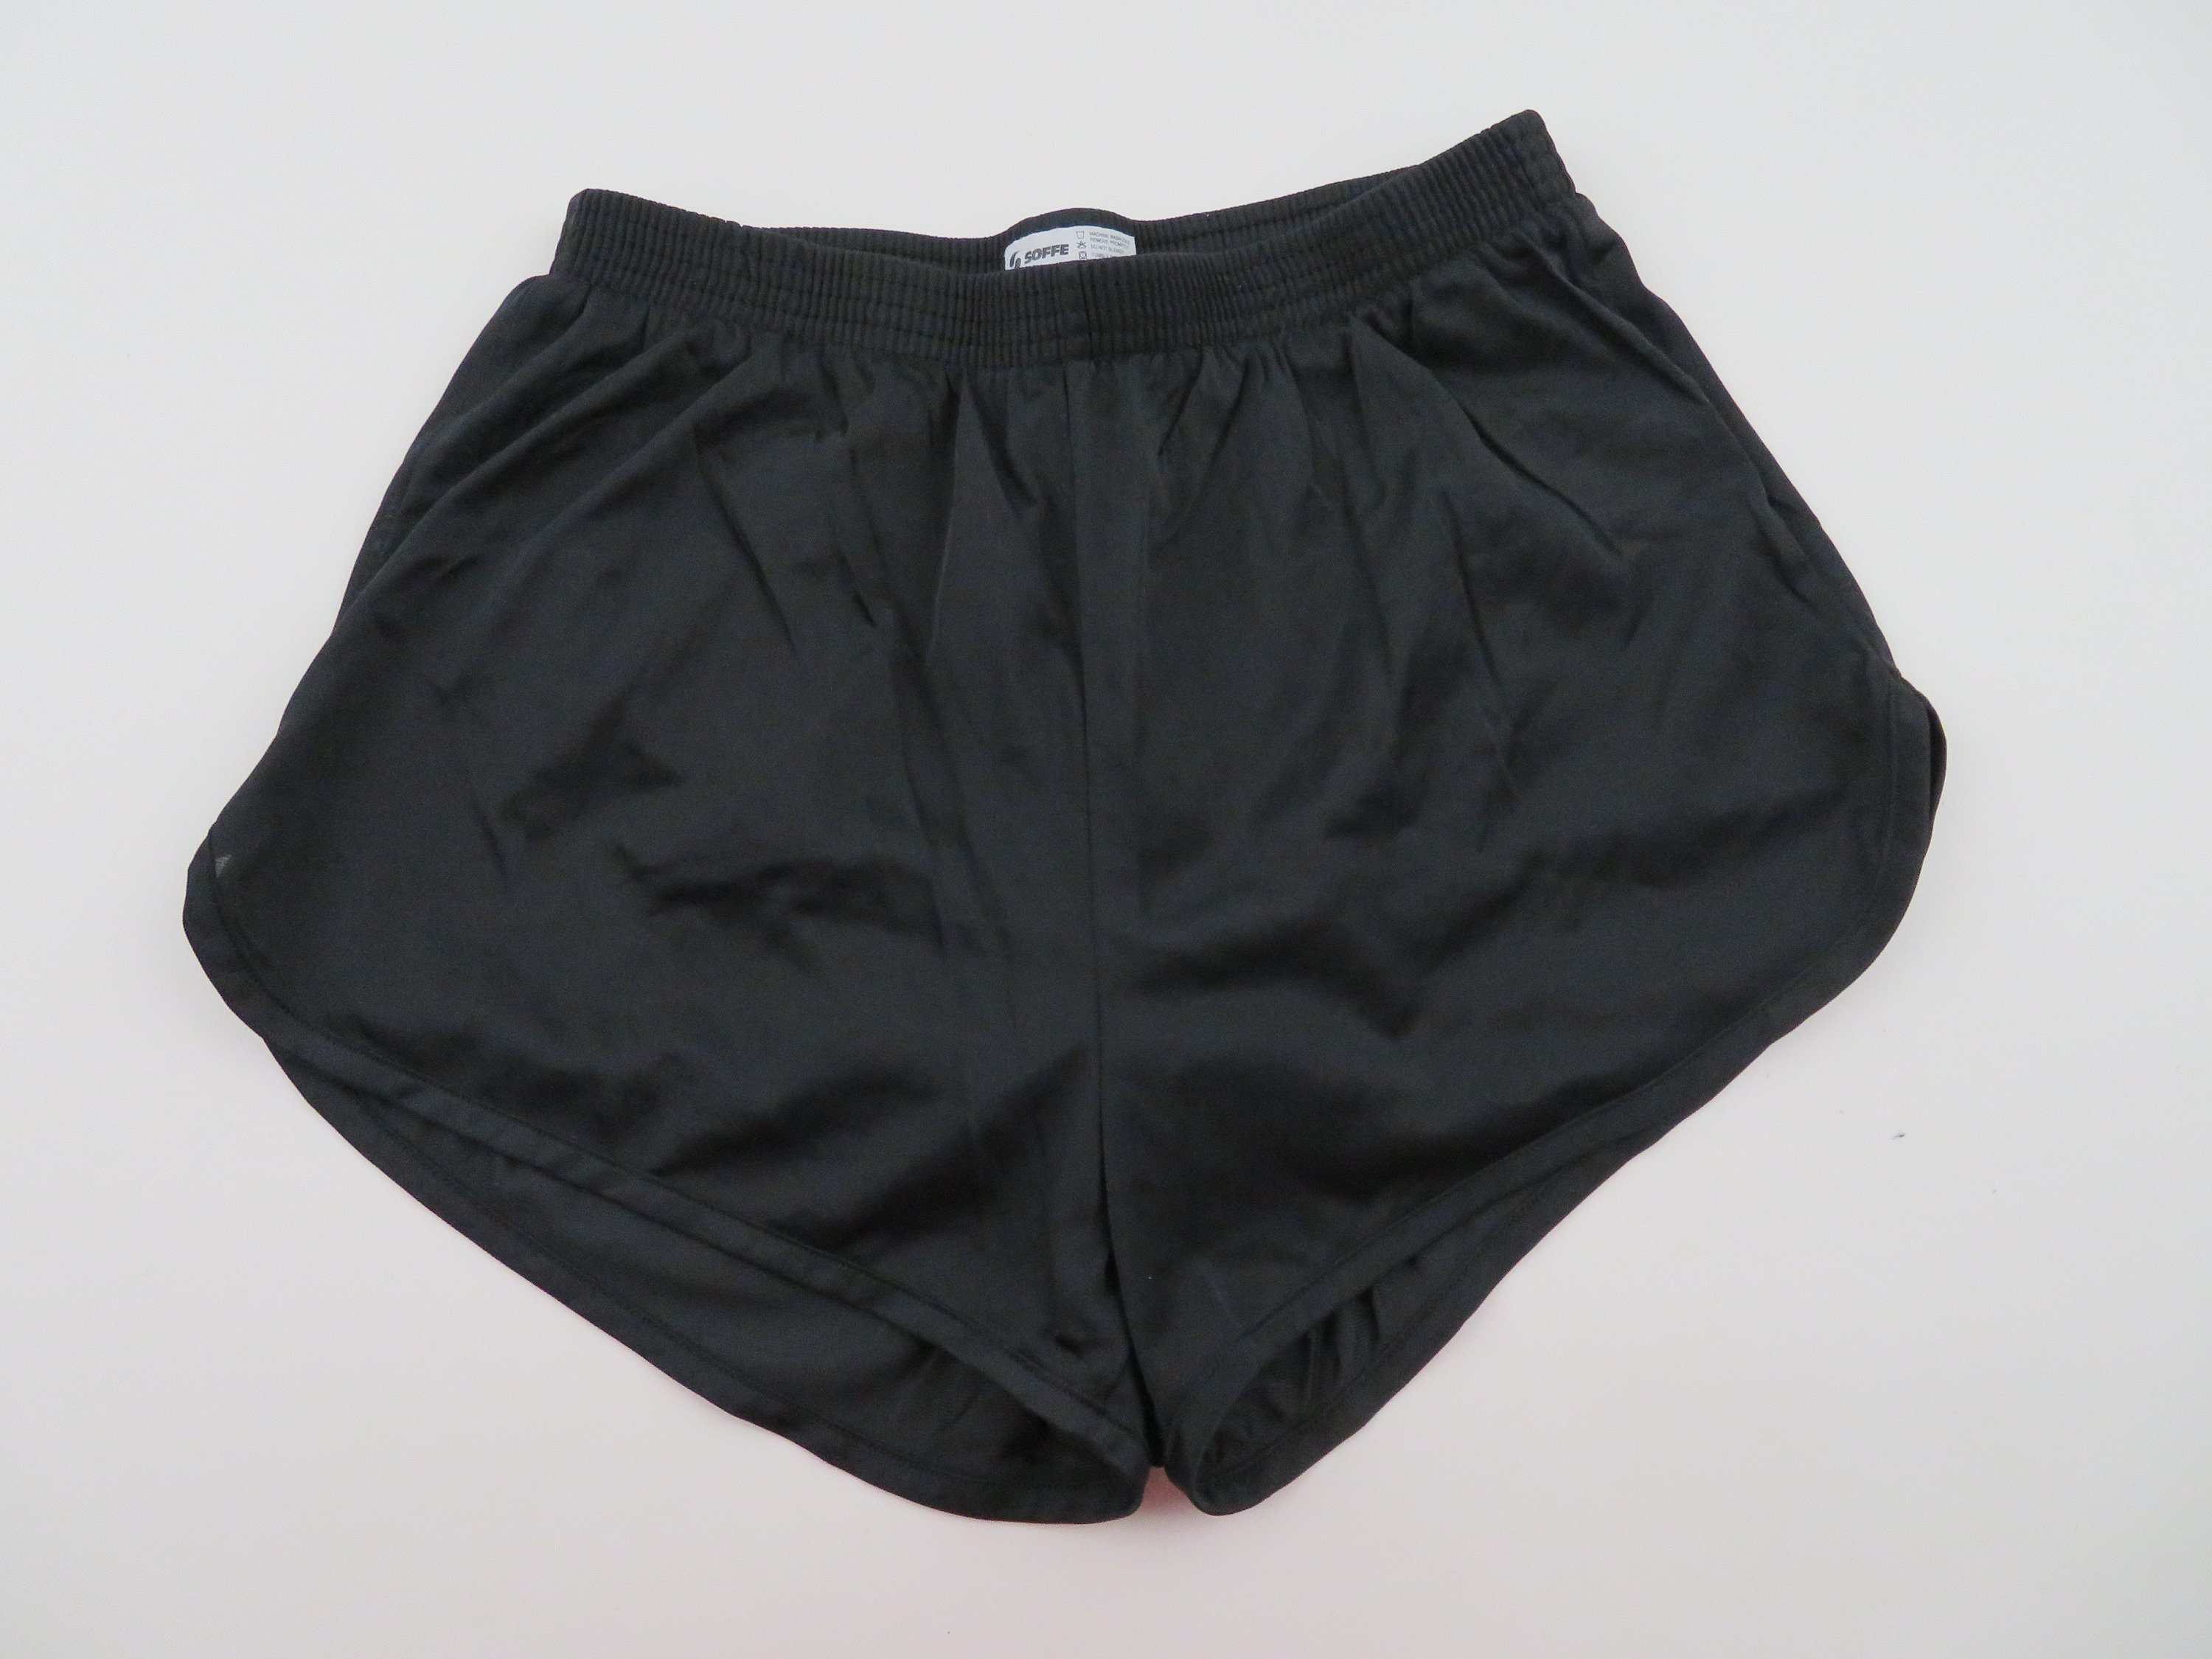 Buy Running Shorts Liner Online In India -  India